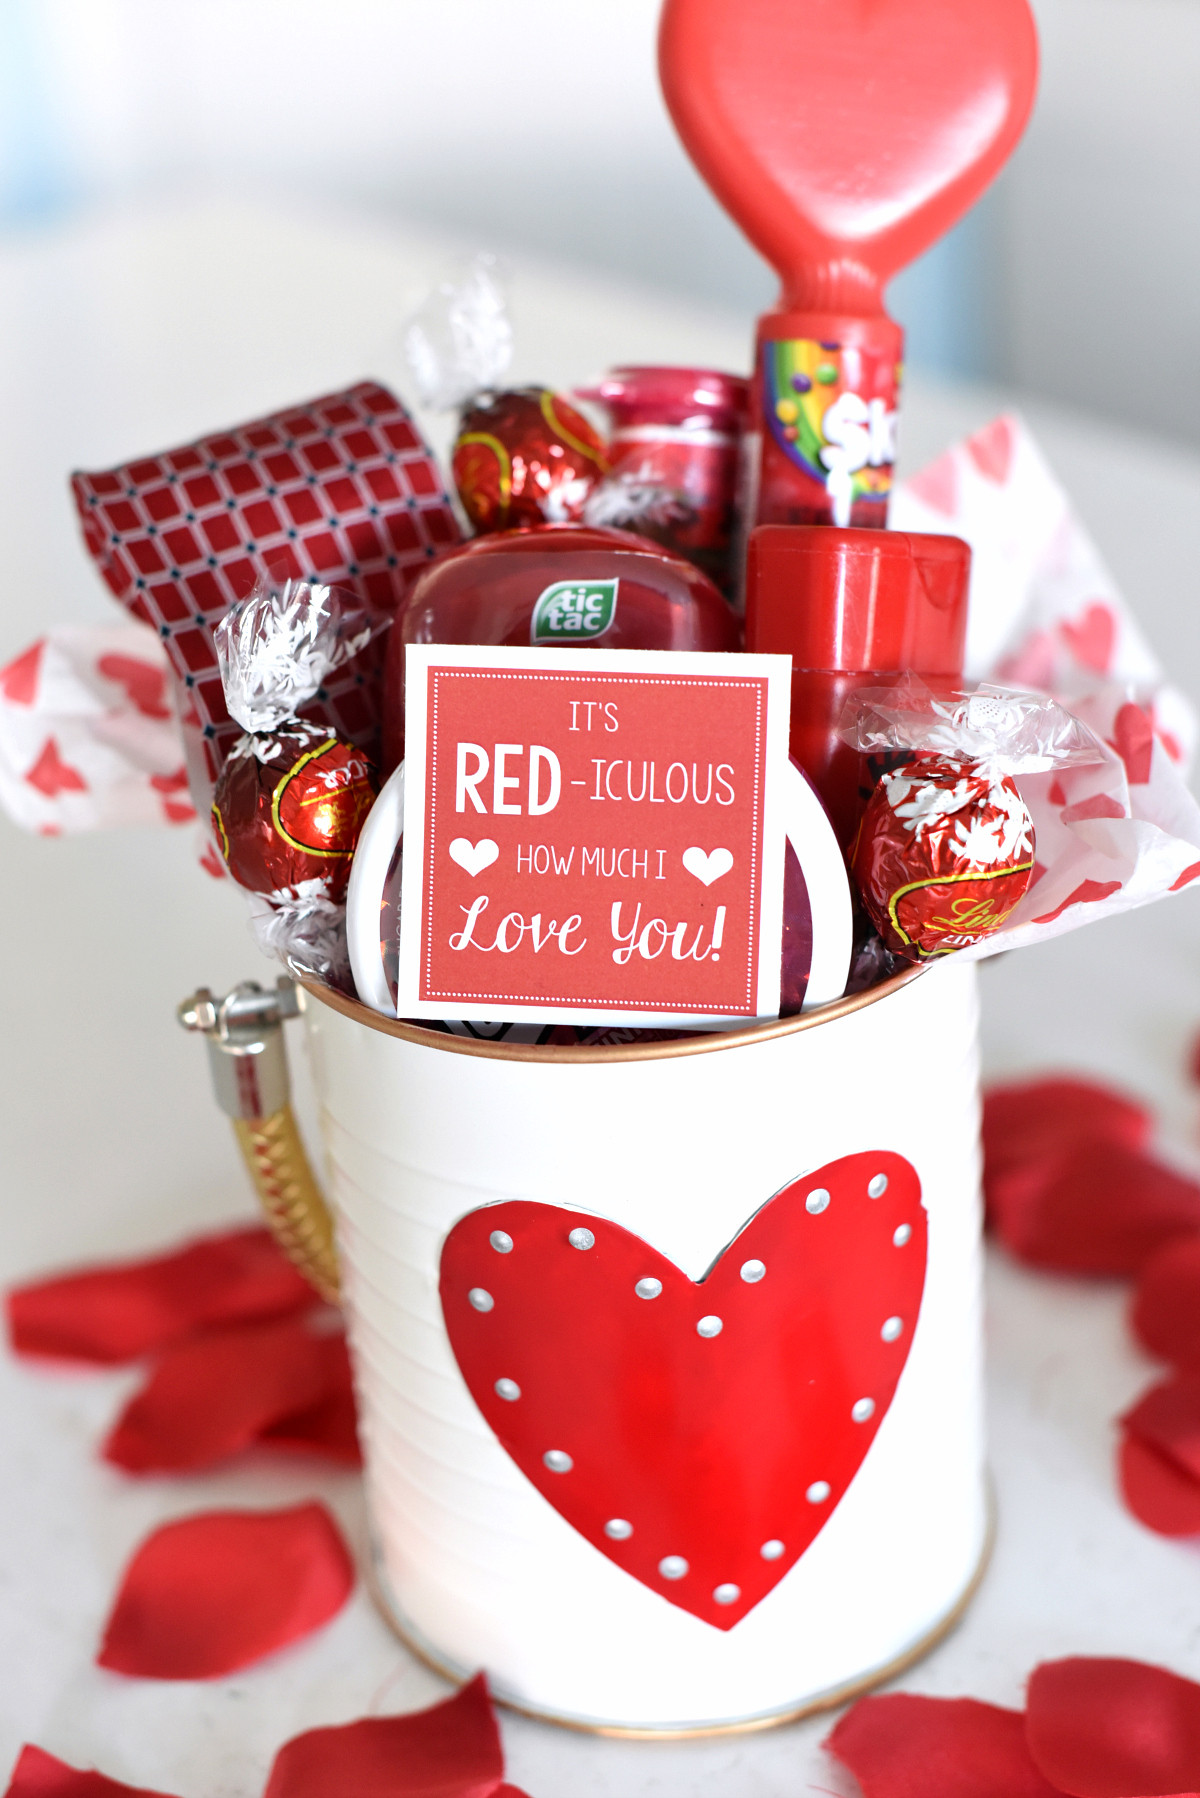 Valentines Gift Ideas
 Cute Valentine s Day Gift Idea RED iculous Basket